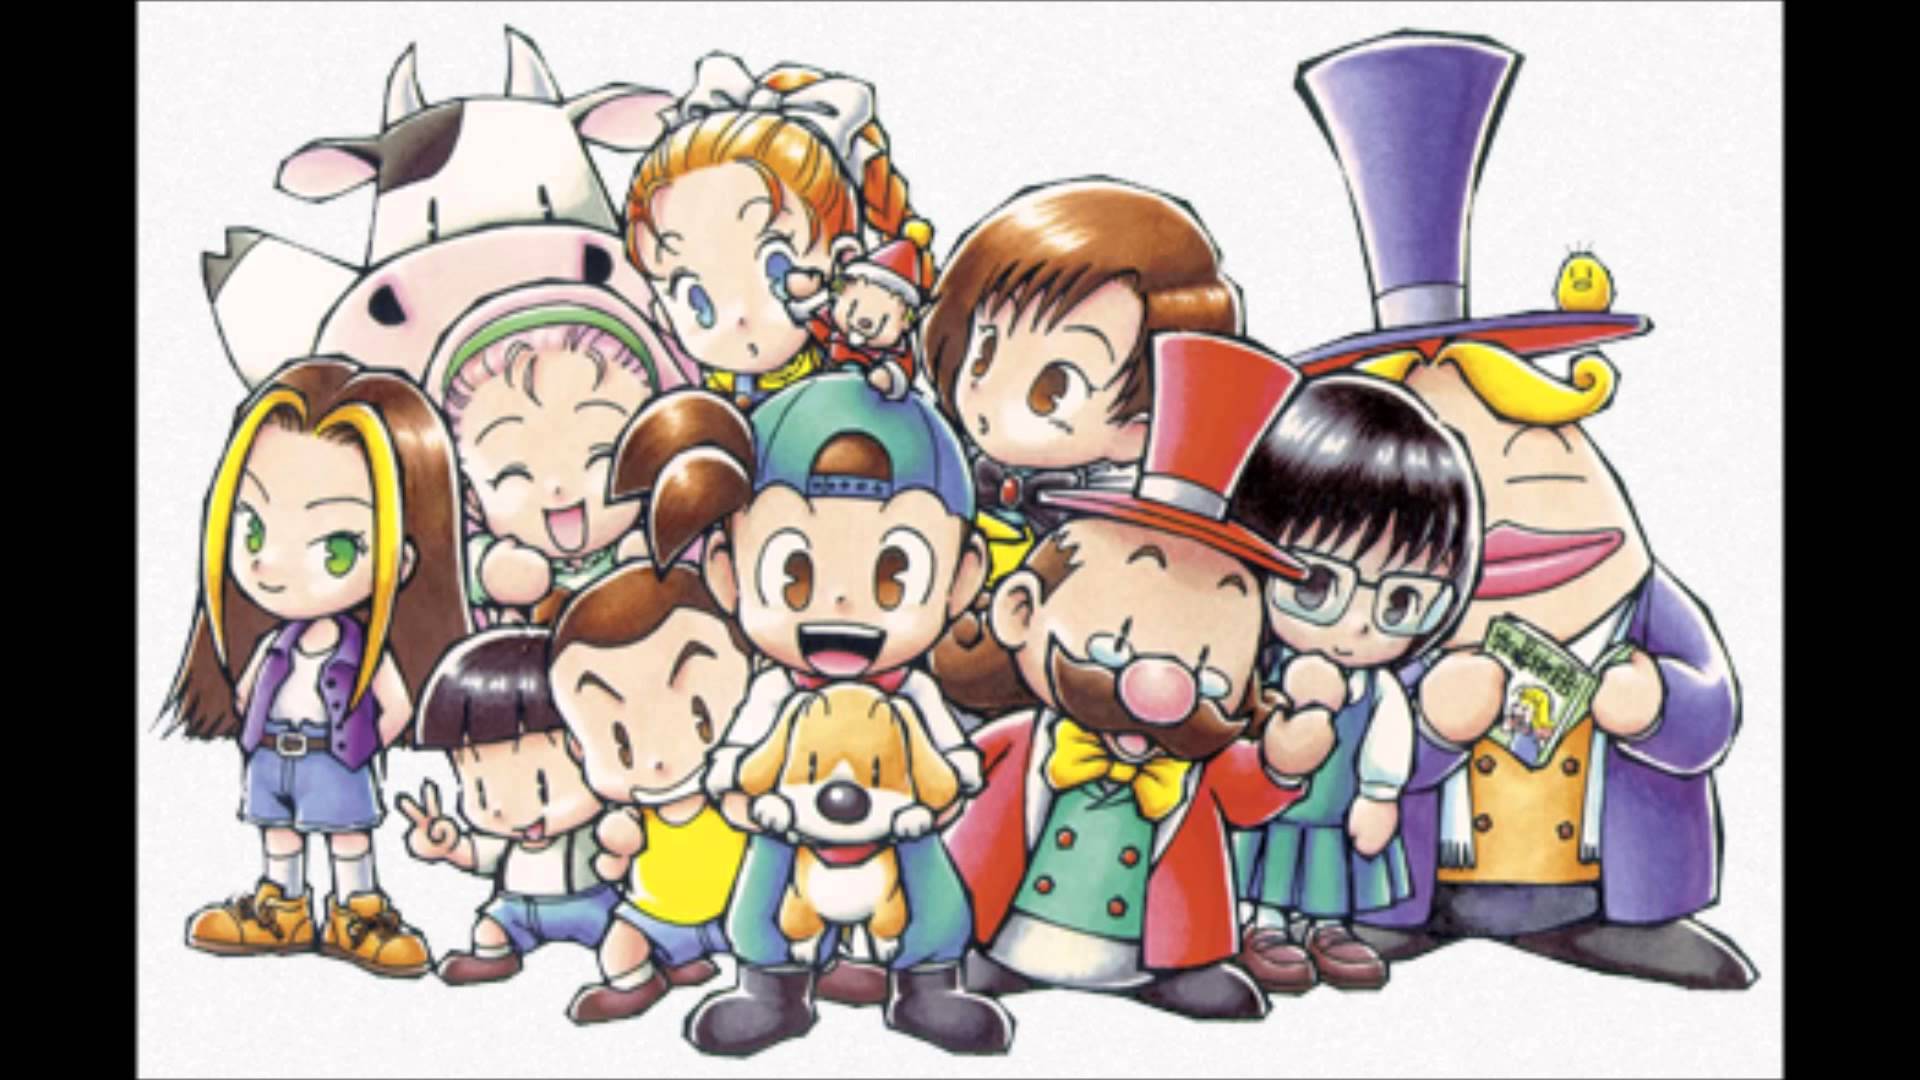 How to play Harvest Moon game from era in your PC zinkohlaing's blog